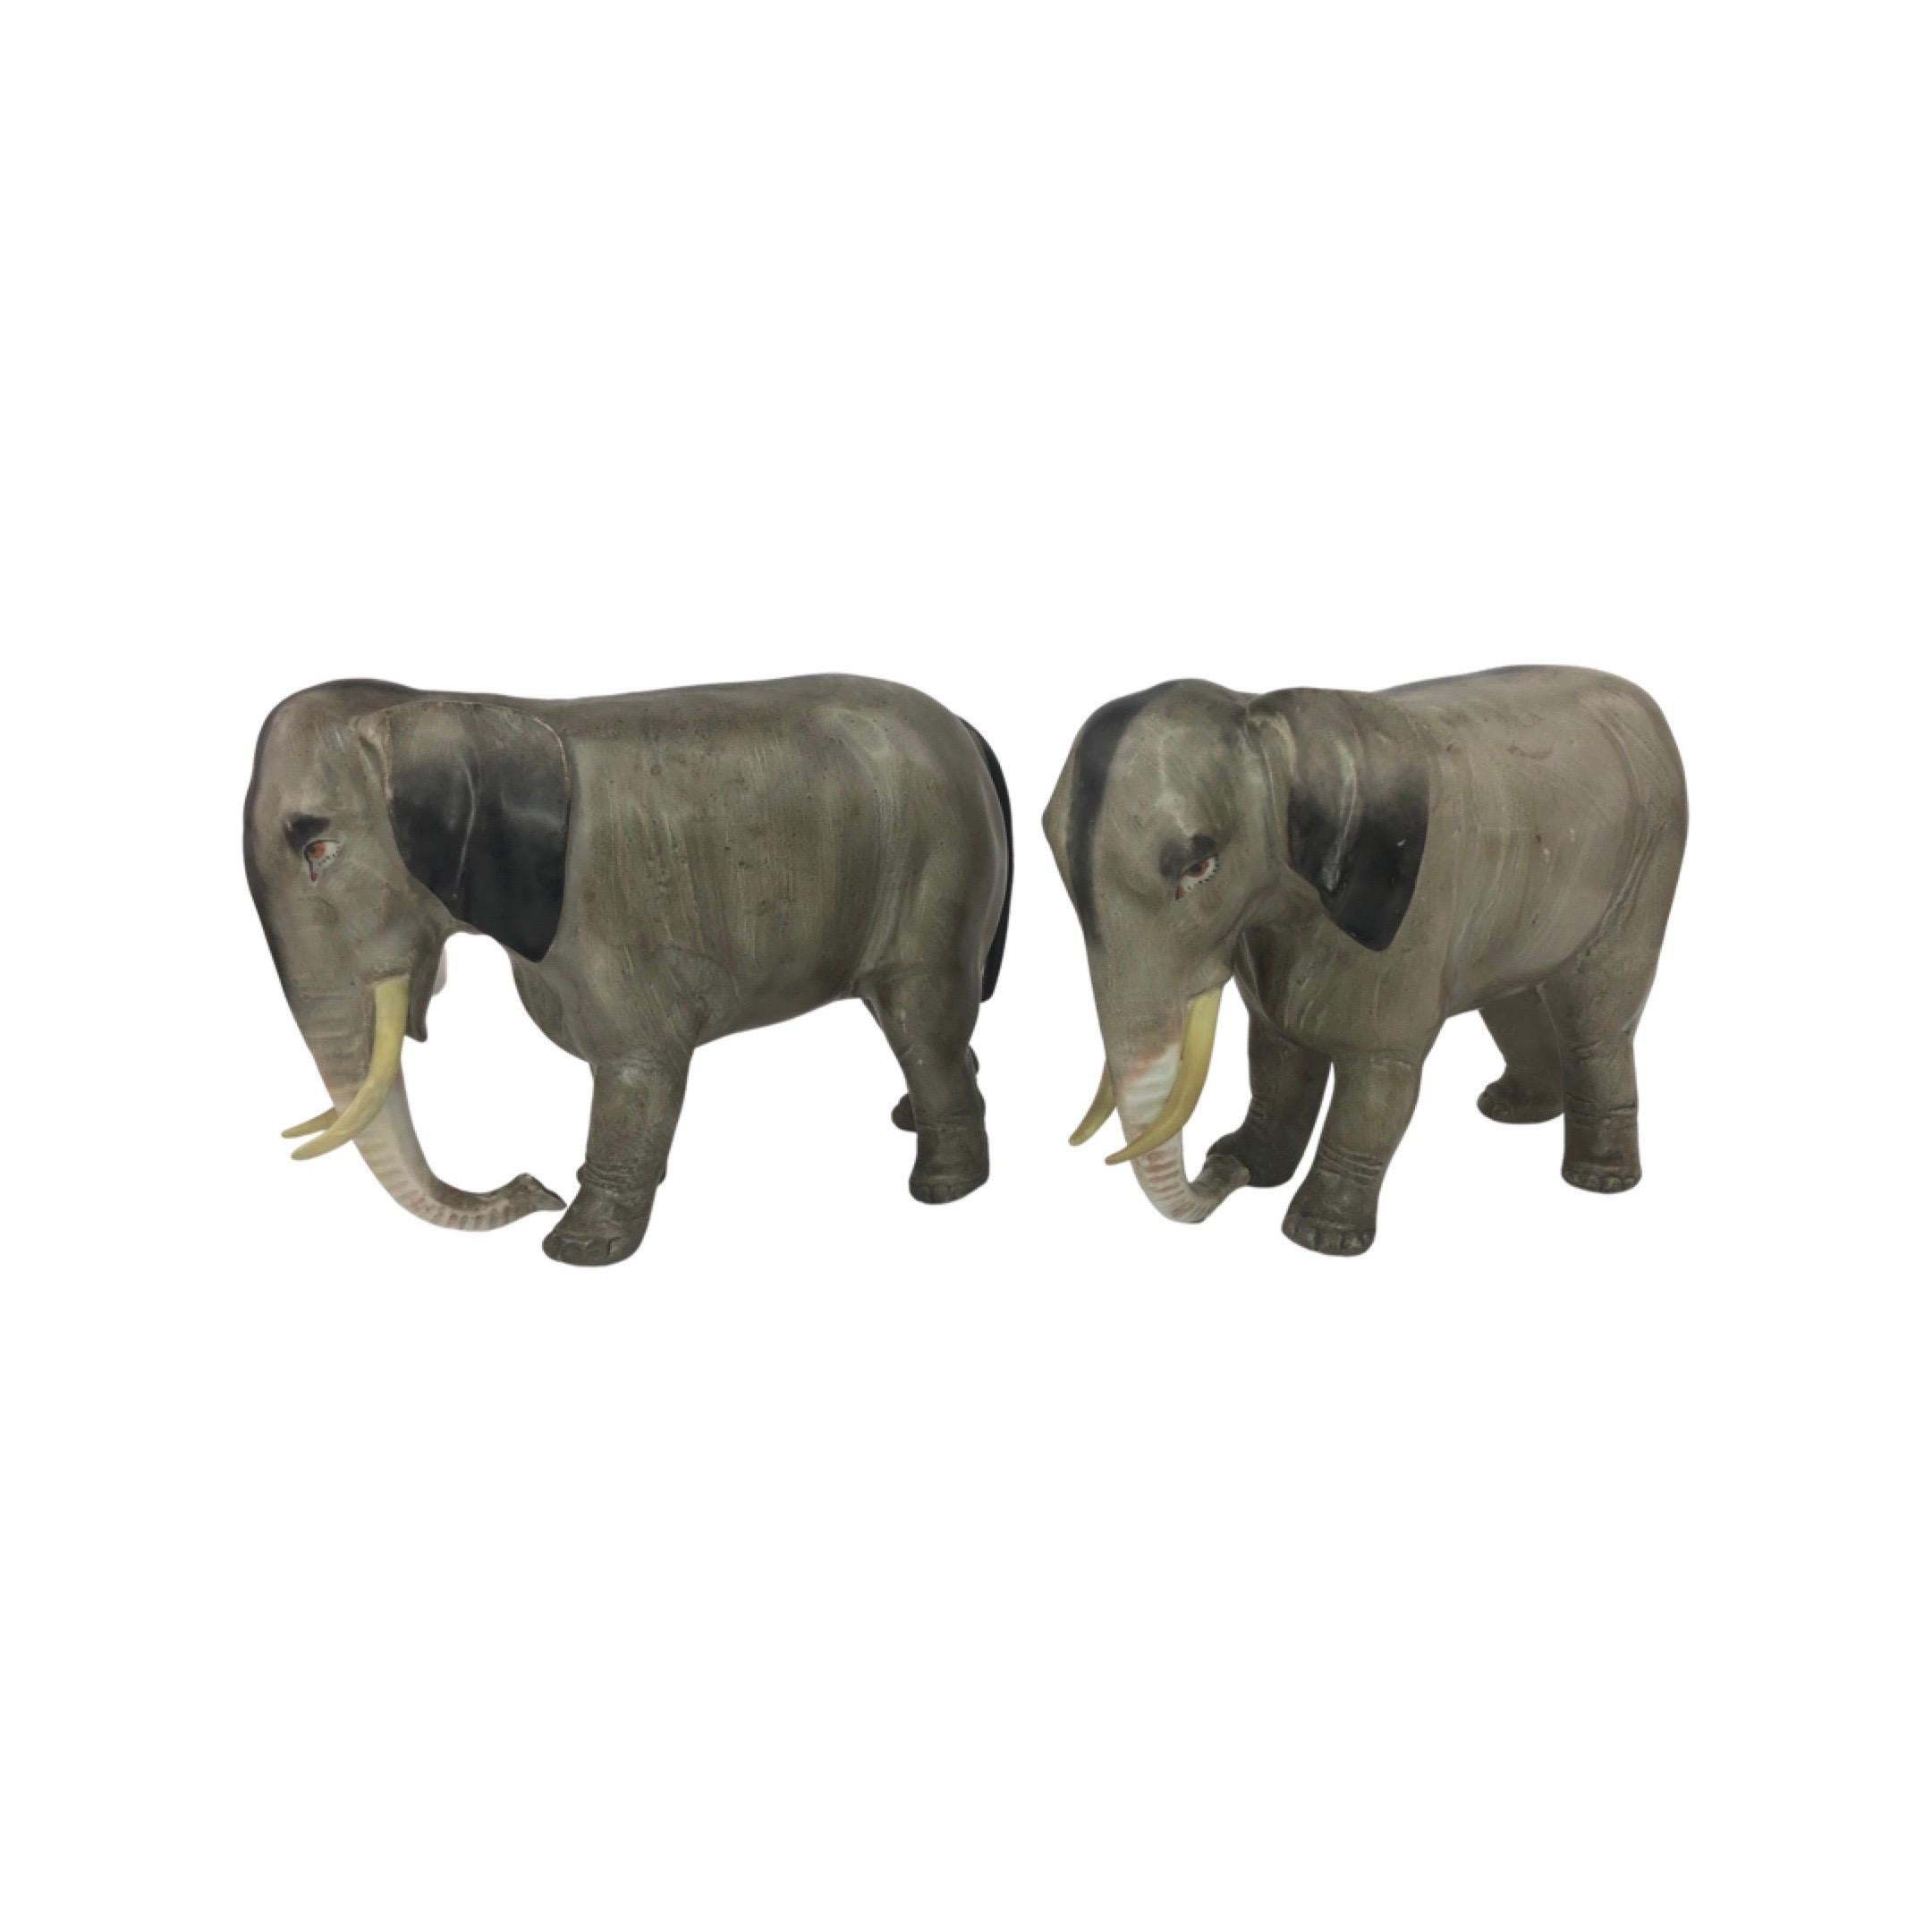 Two German 1920s German Porcelain Elephants.

These pair in the classic gray coloration with a black streak running along the back. Both figures are in very good vintage condition with no chips or crack. These pair would make a great decorative